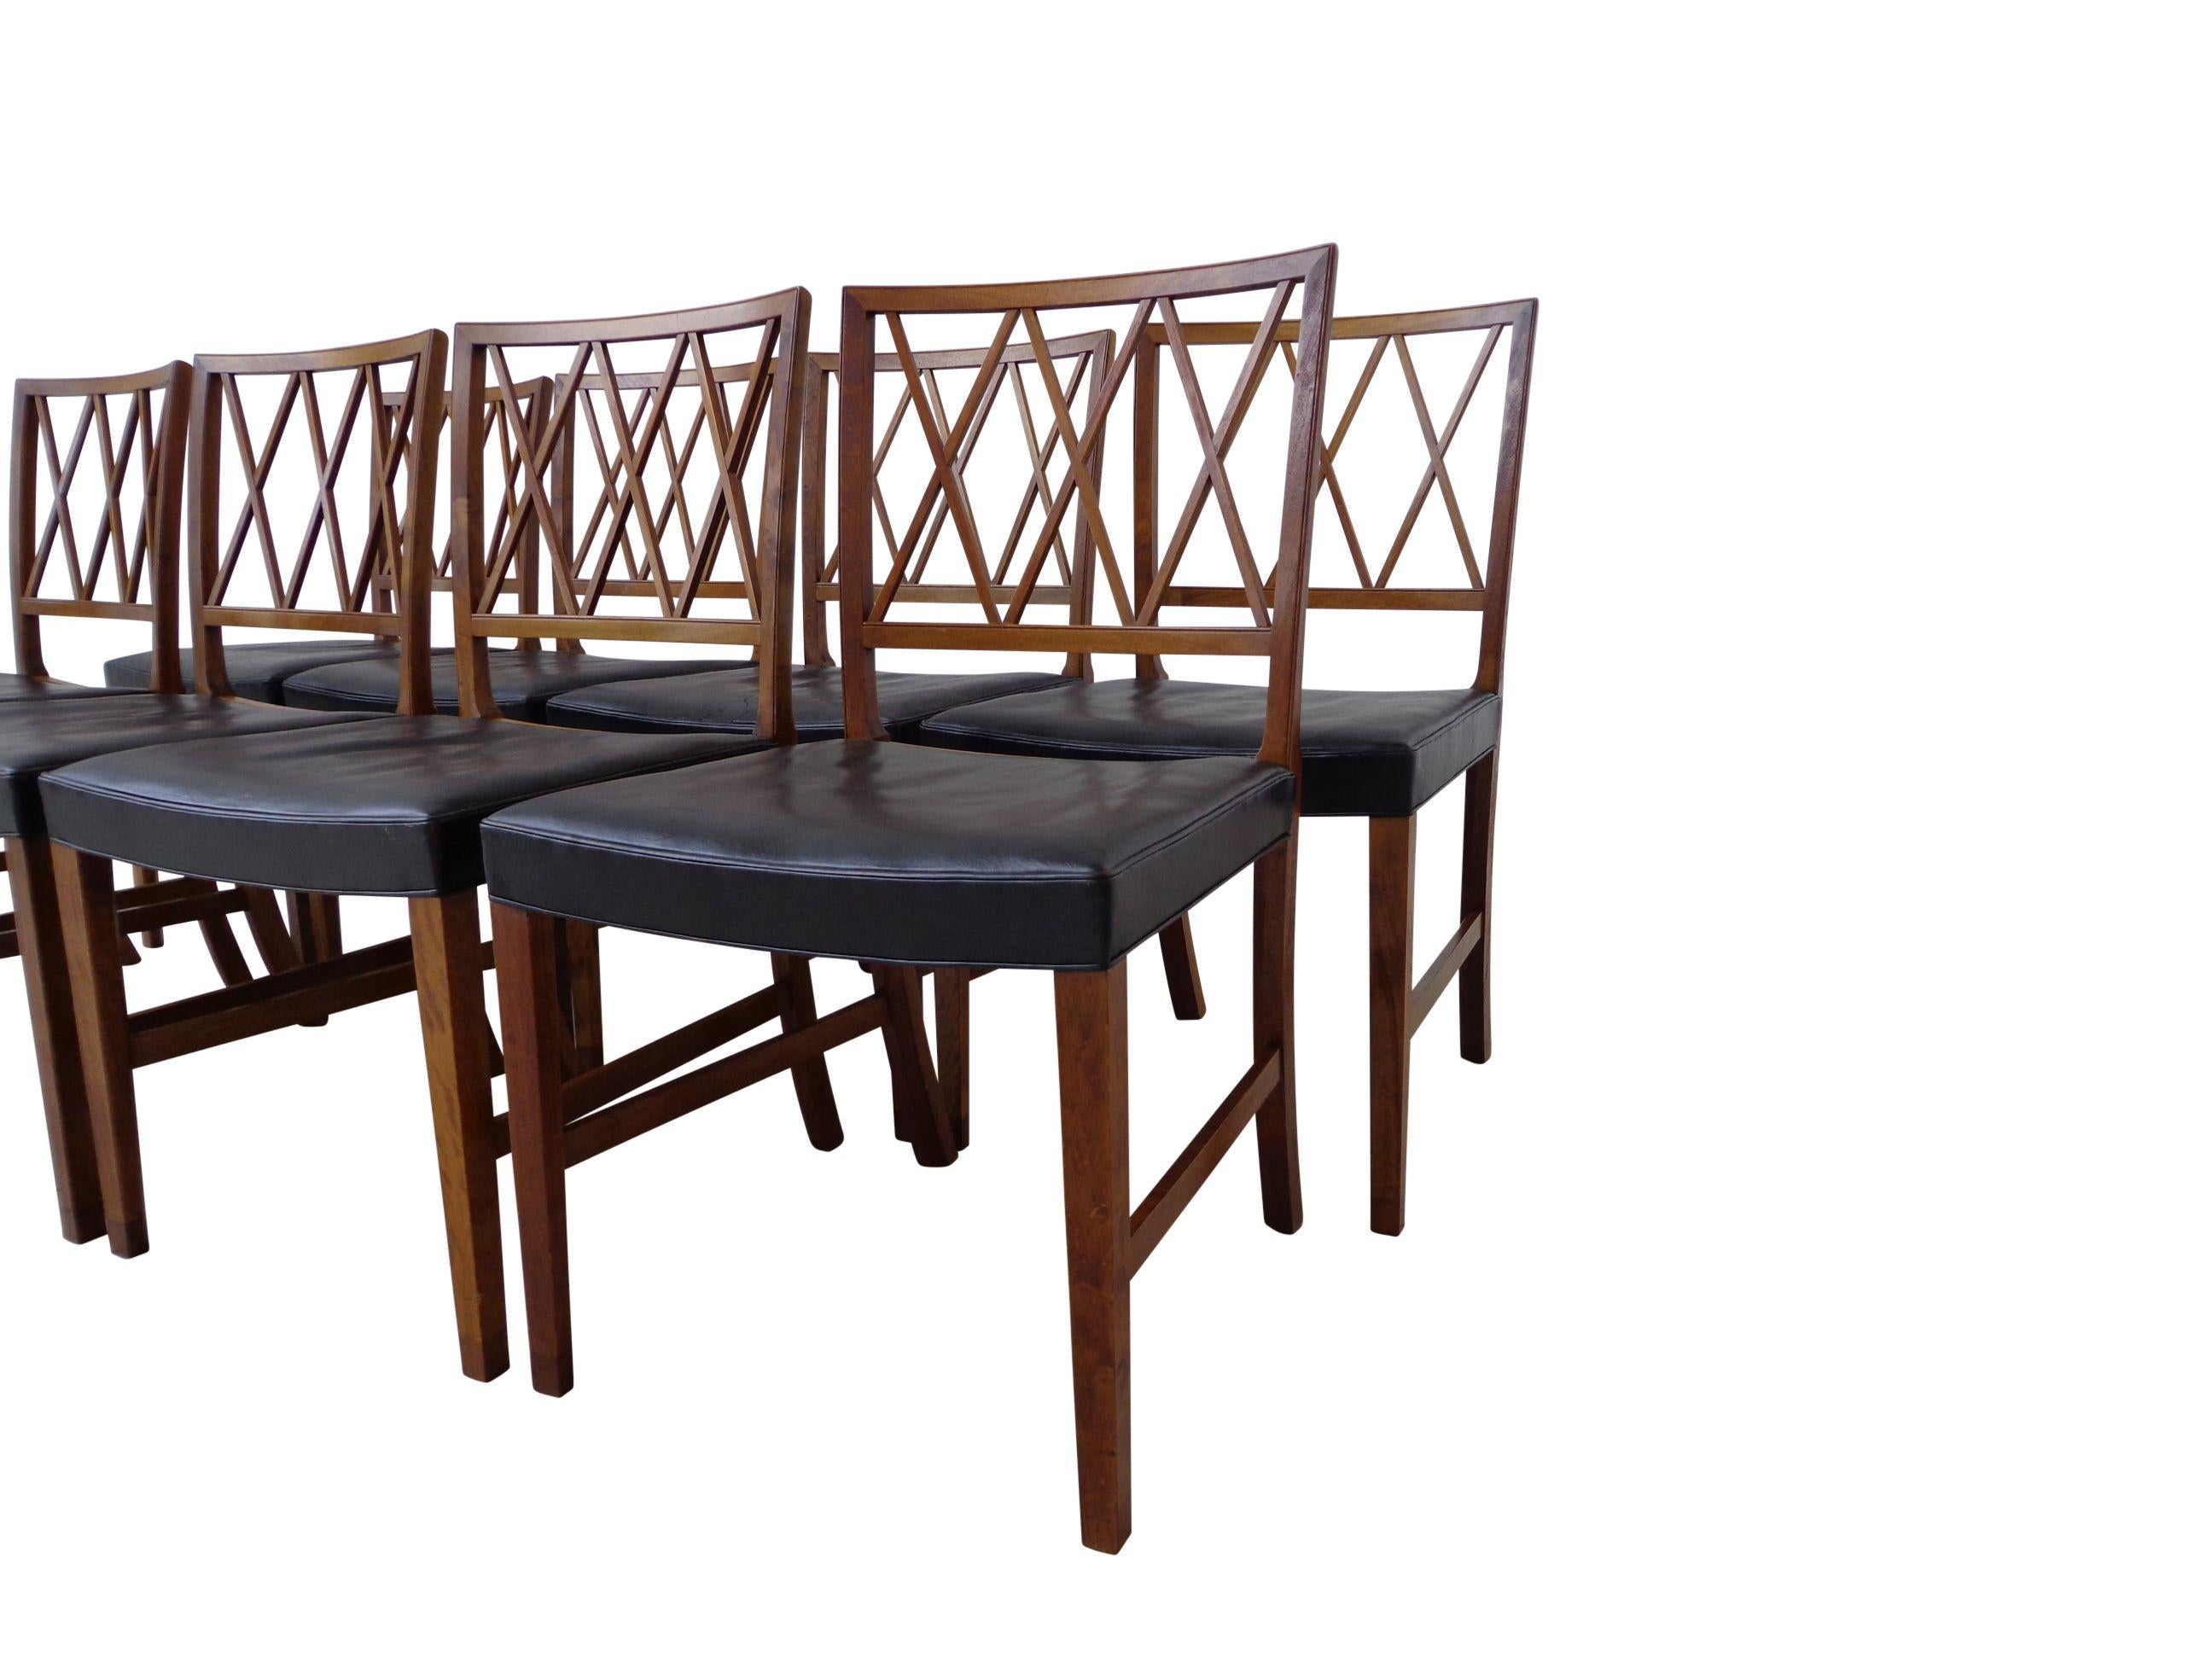 Mid-20th Century Ole Wanscher Dining Chairs by Cabinetmaker A.J Iversen in Denmark 1940s For Sale